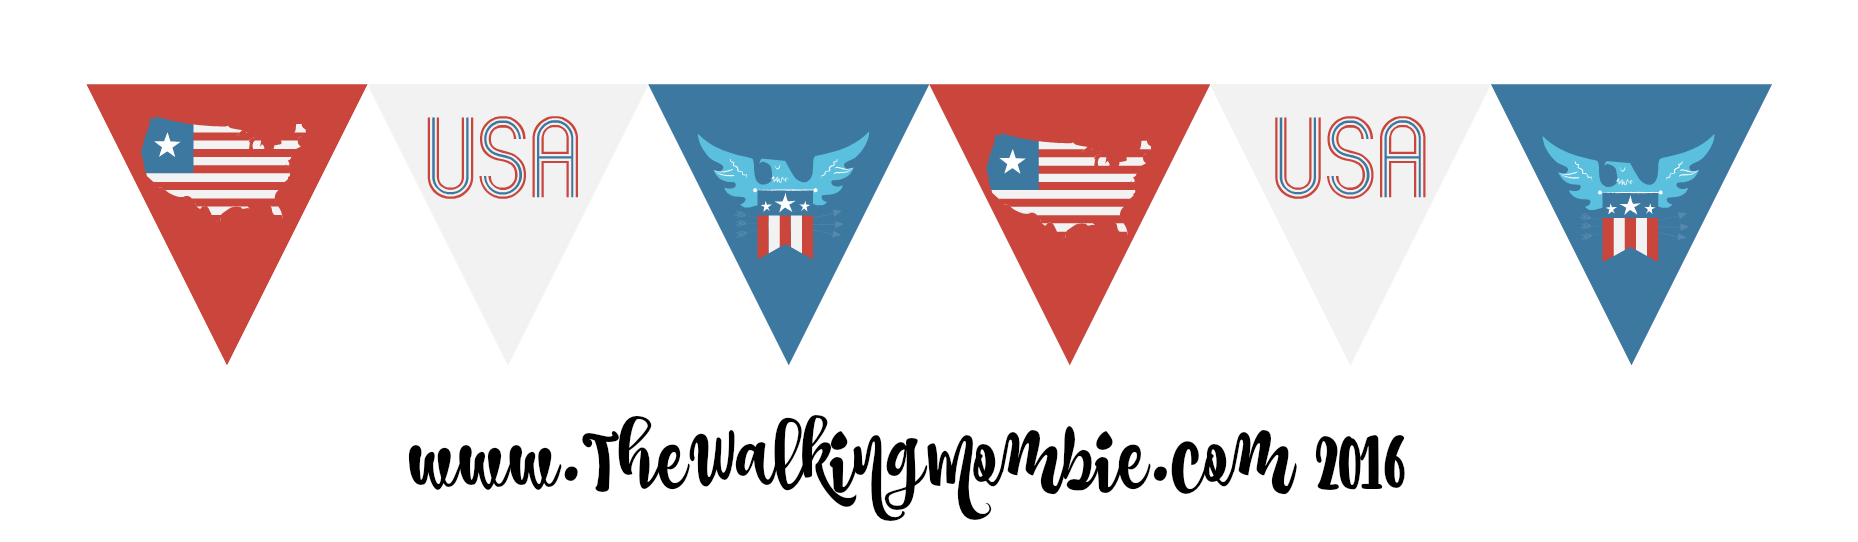 usa clipart bunting